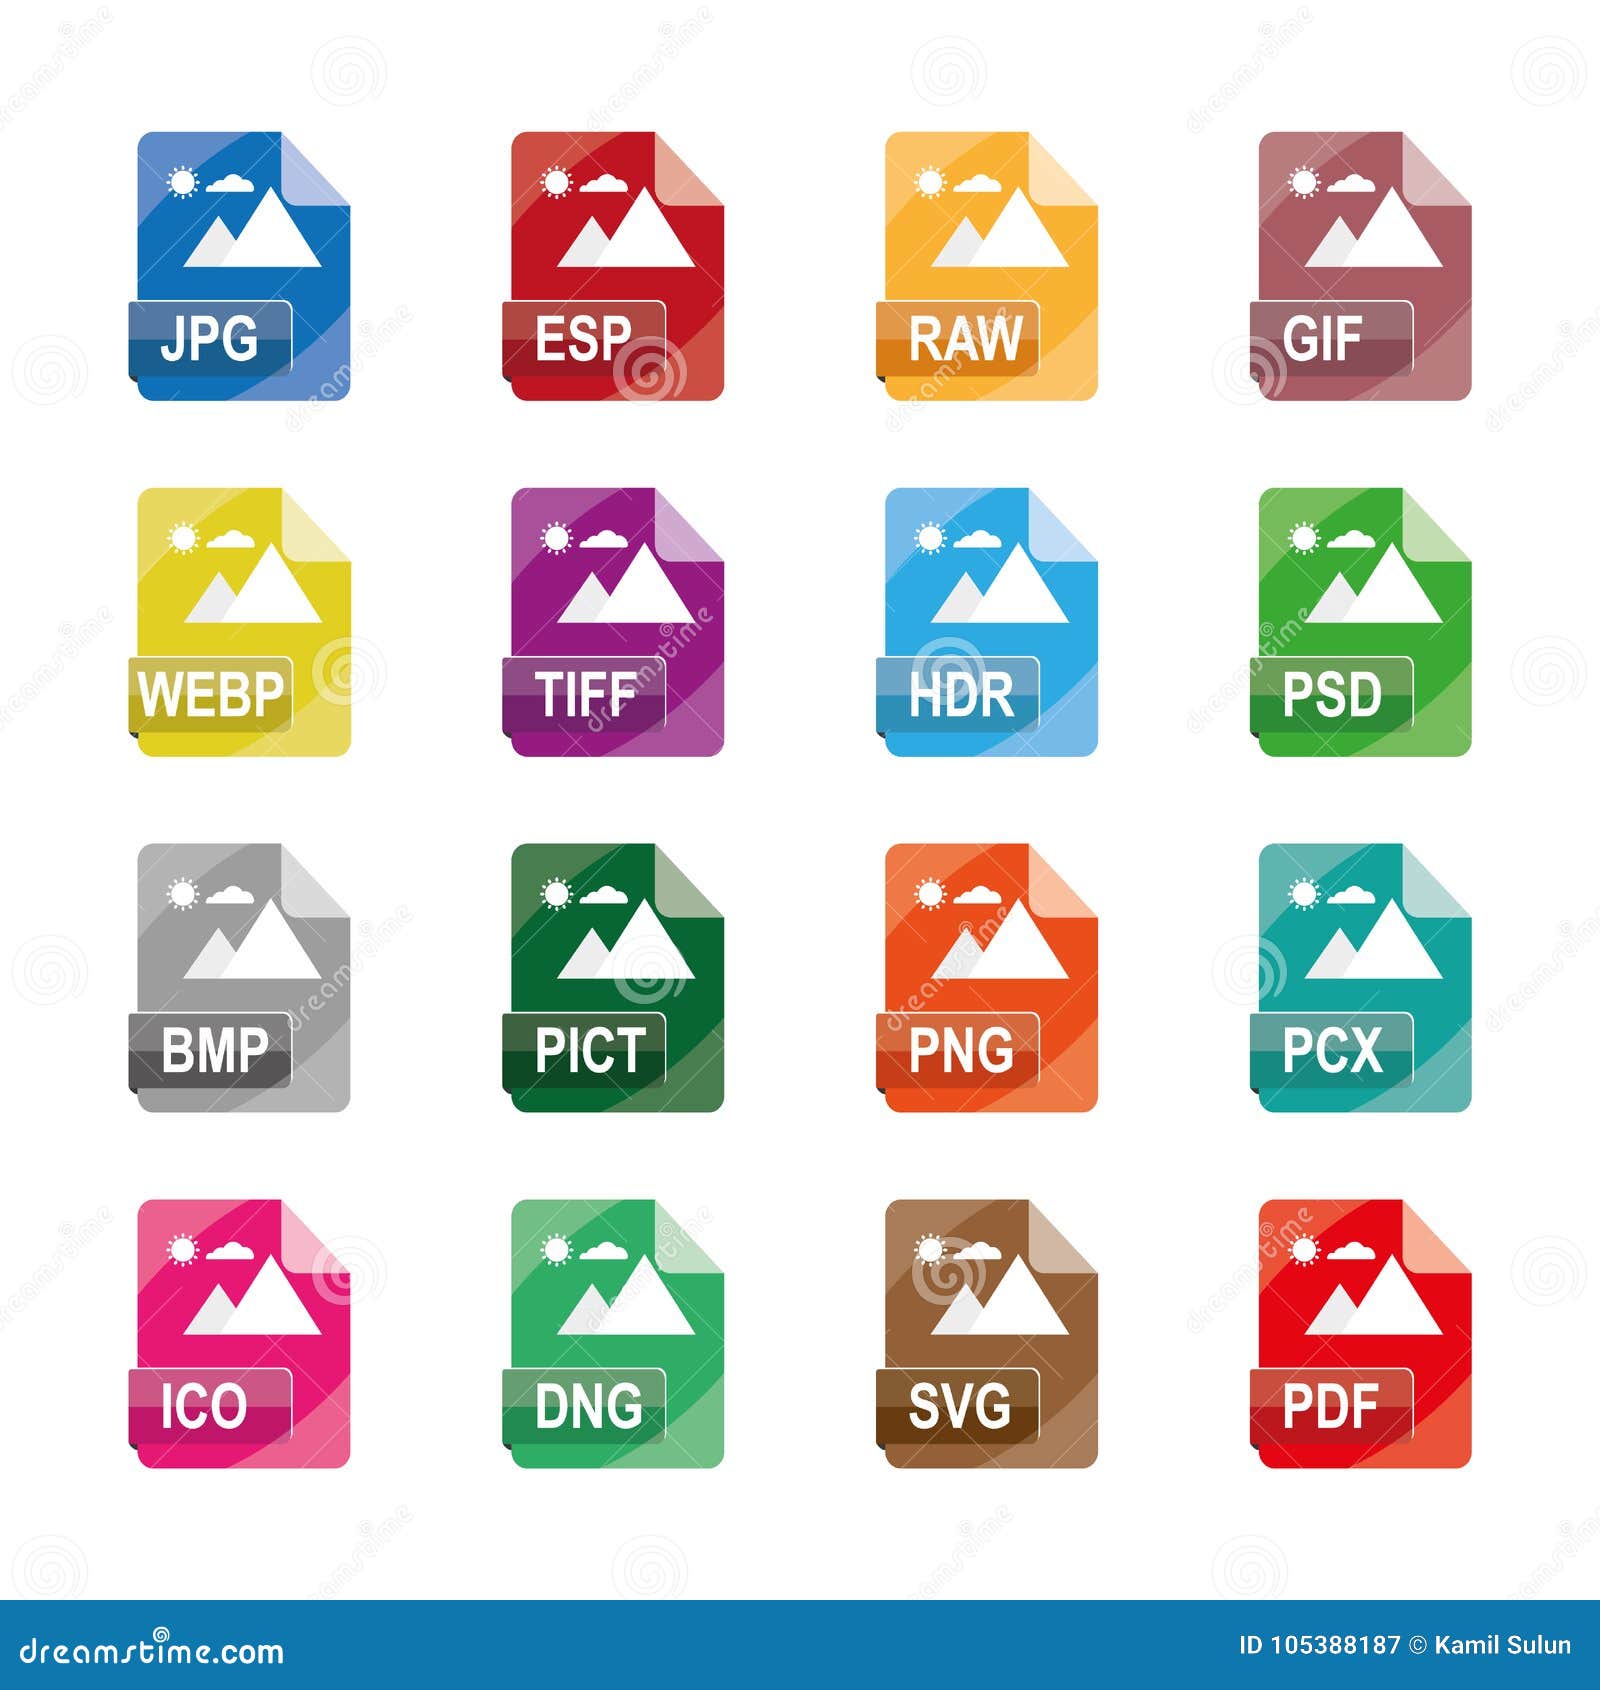 Image File Formats File Extensions Flat Colorful Vector Icons